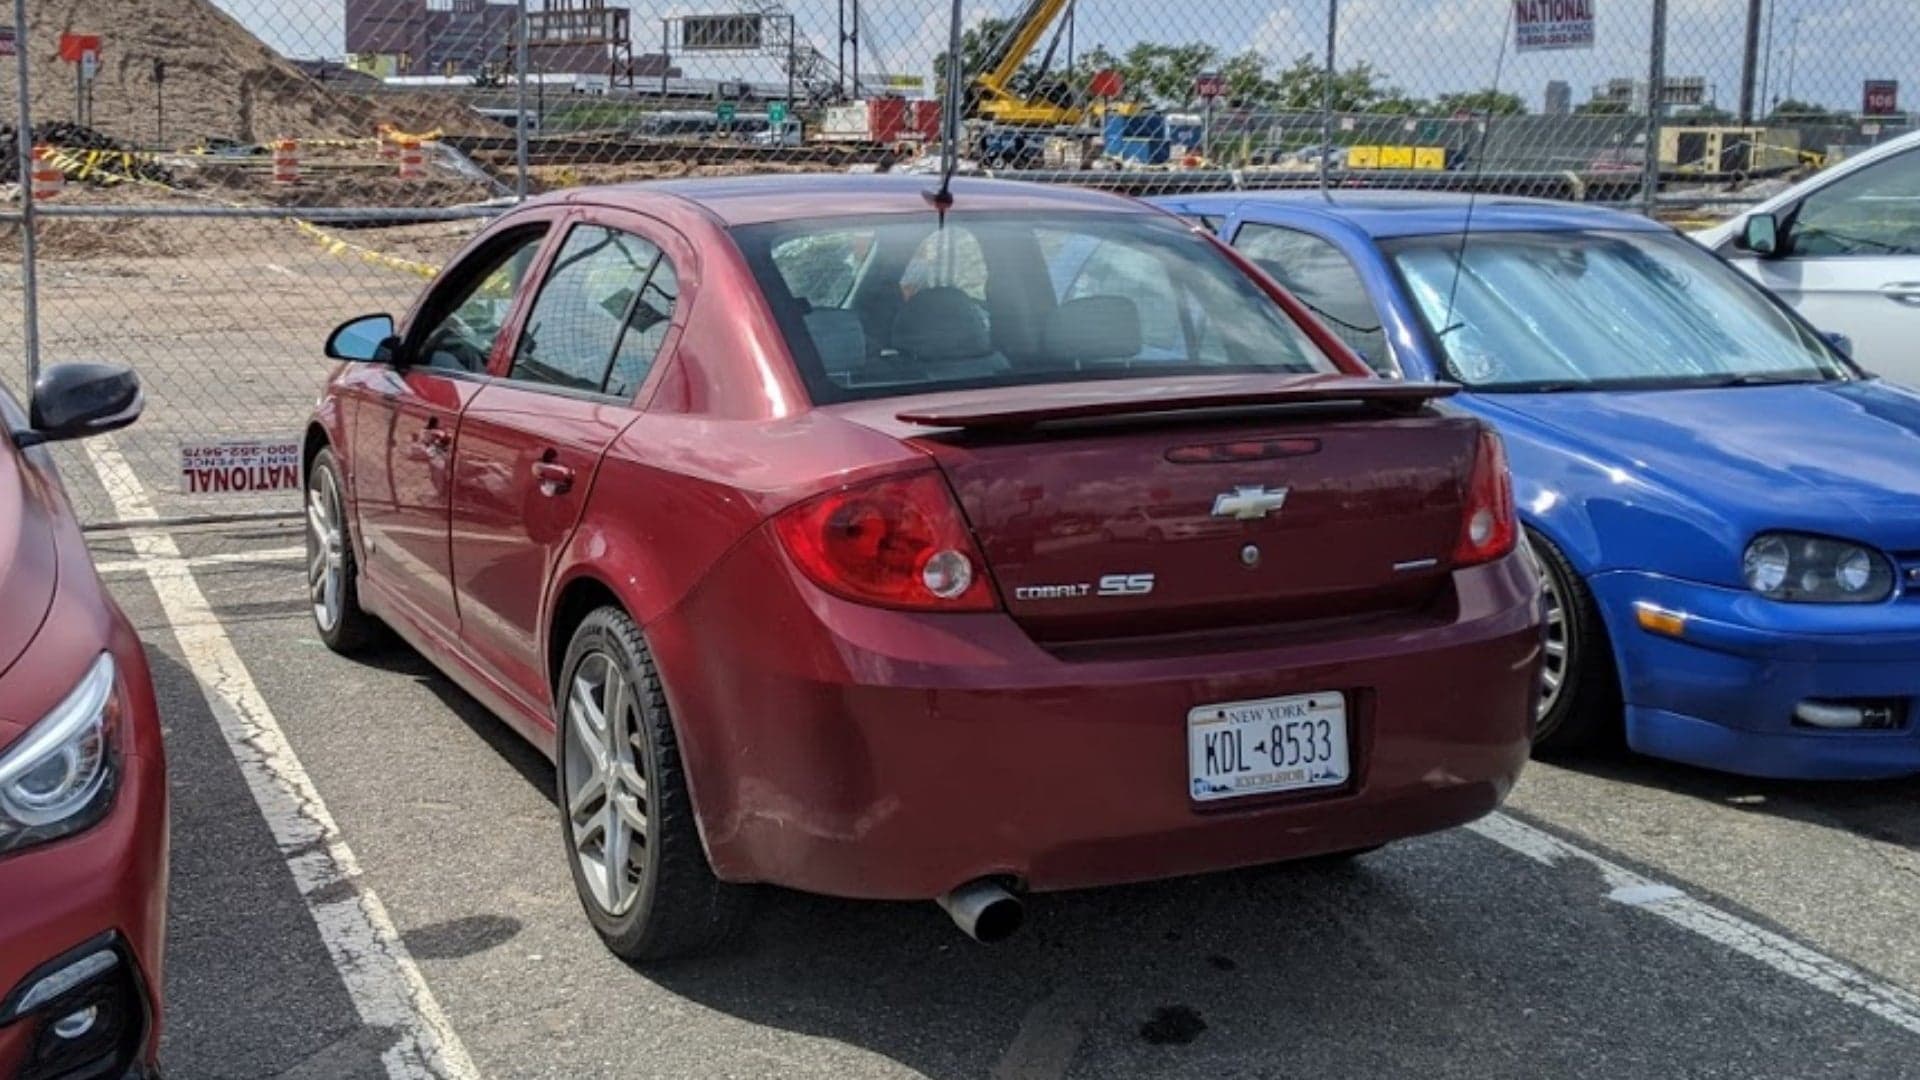 I Took My Modified Chevy Cobalt SS on Its First Road Trip. My Pride Is Still Intact